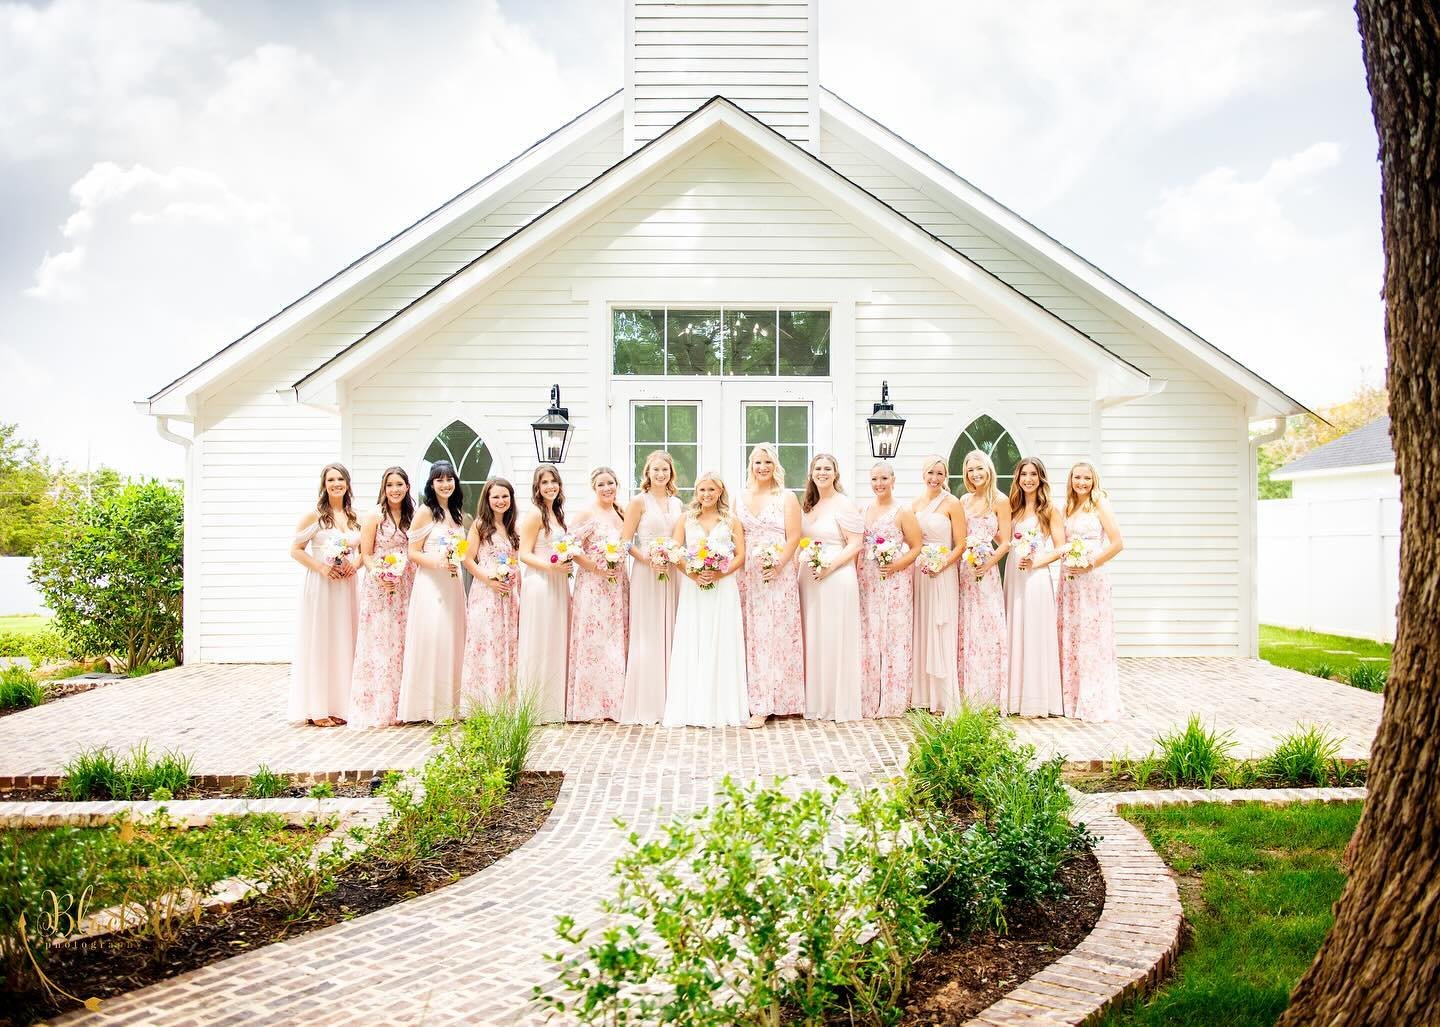 Emily + Ford | May 11, 2024 💍⛪️

Still swooning over Emily&rsquo;s bridesmaid colors!

@springsvenue
@springsvenuevalleyview
@pinkglitterevents
@tgriggs15
@bblewisville 
@blackallphotography
@teasetopleasehairandmakeup
@anniesflowerstx
@extremecuisi